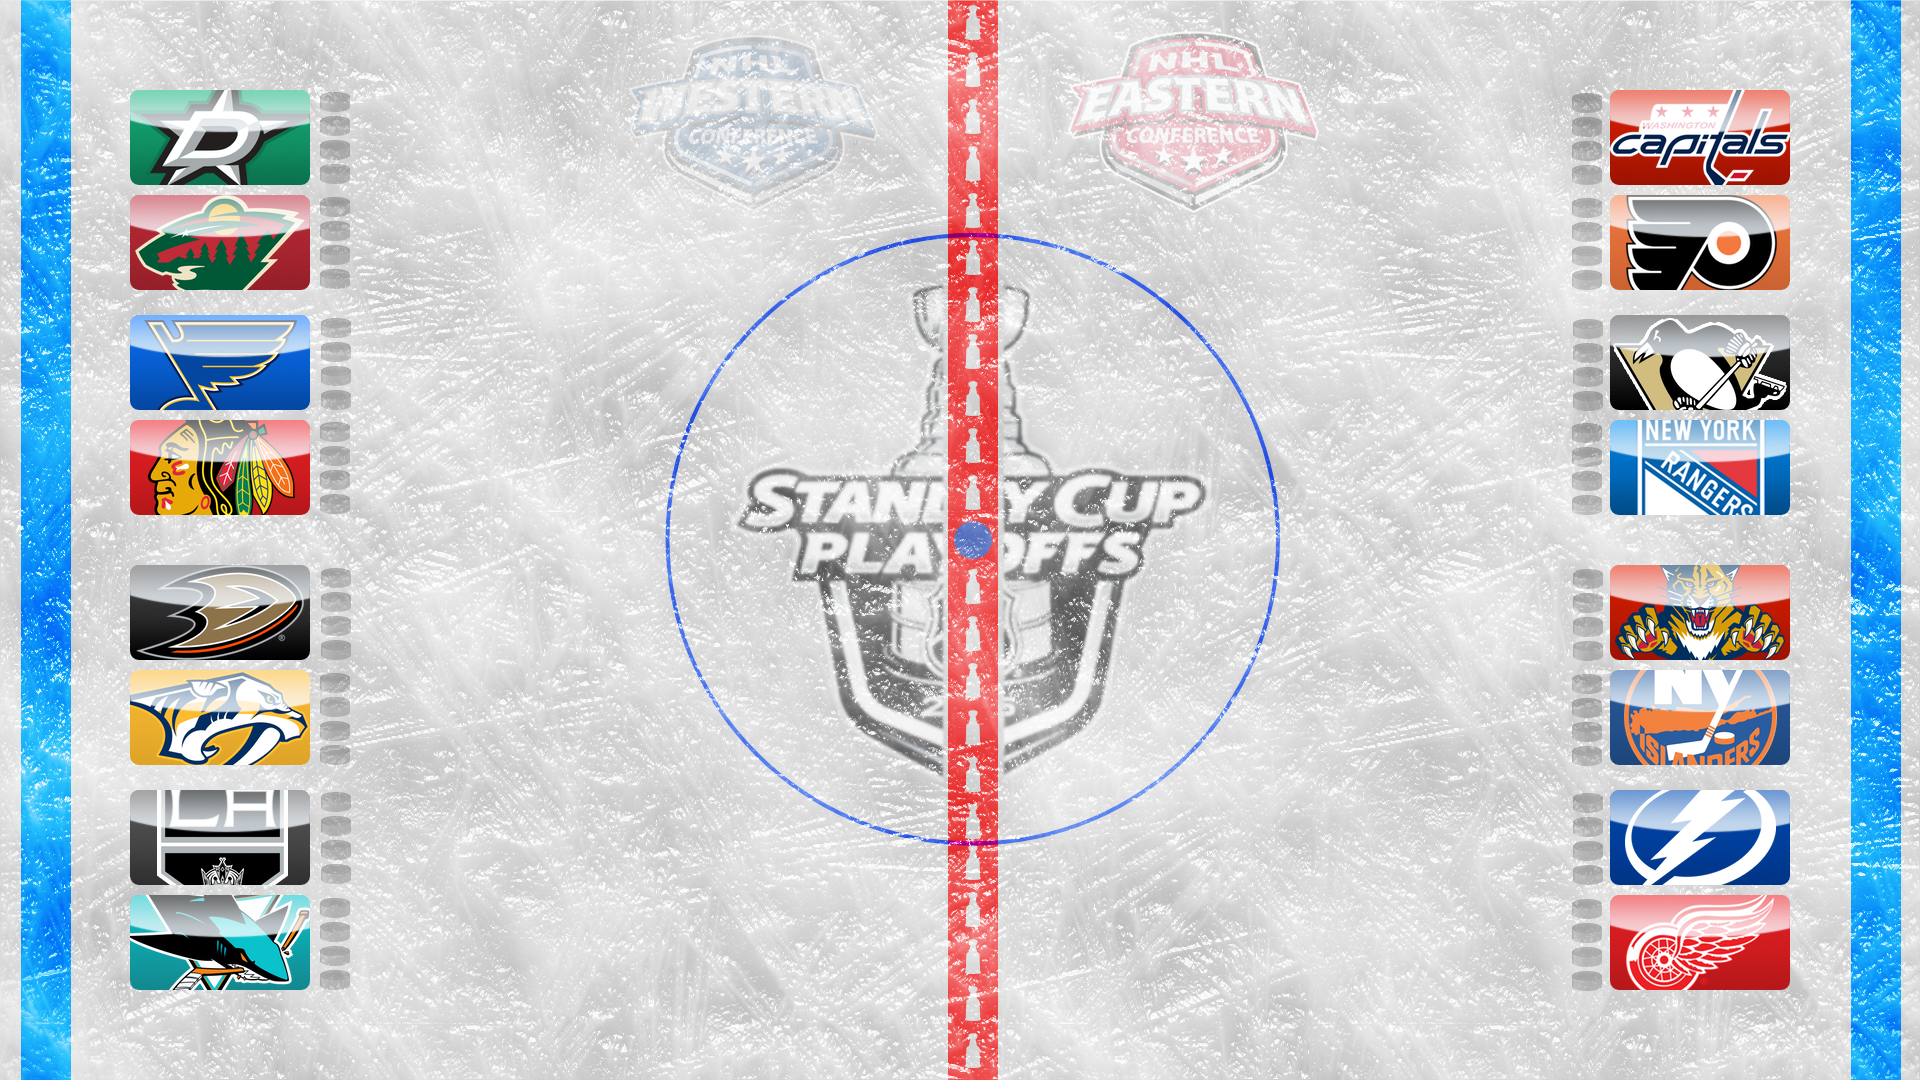 Nhl Stanley Cup Playoffs Wallpaper Concepts Chris Creamer S